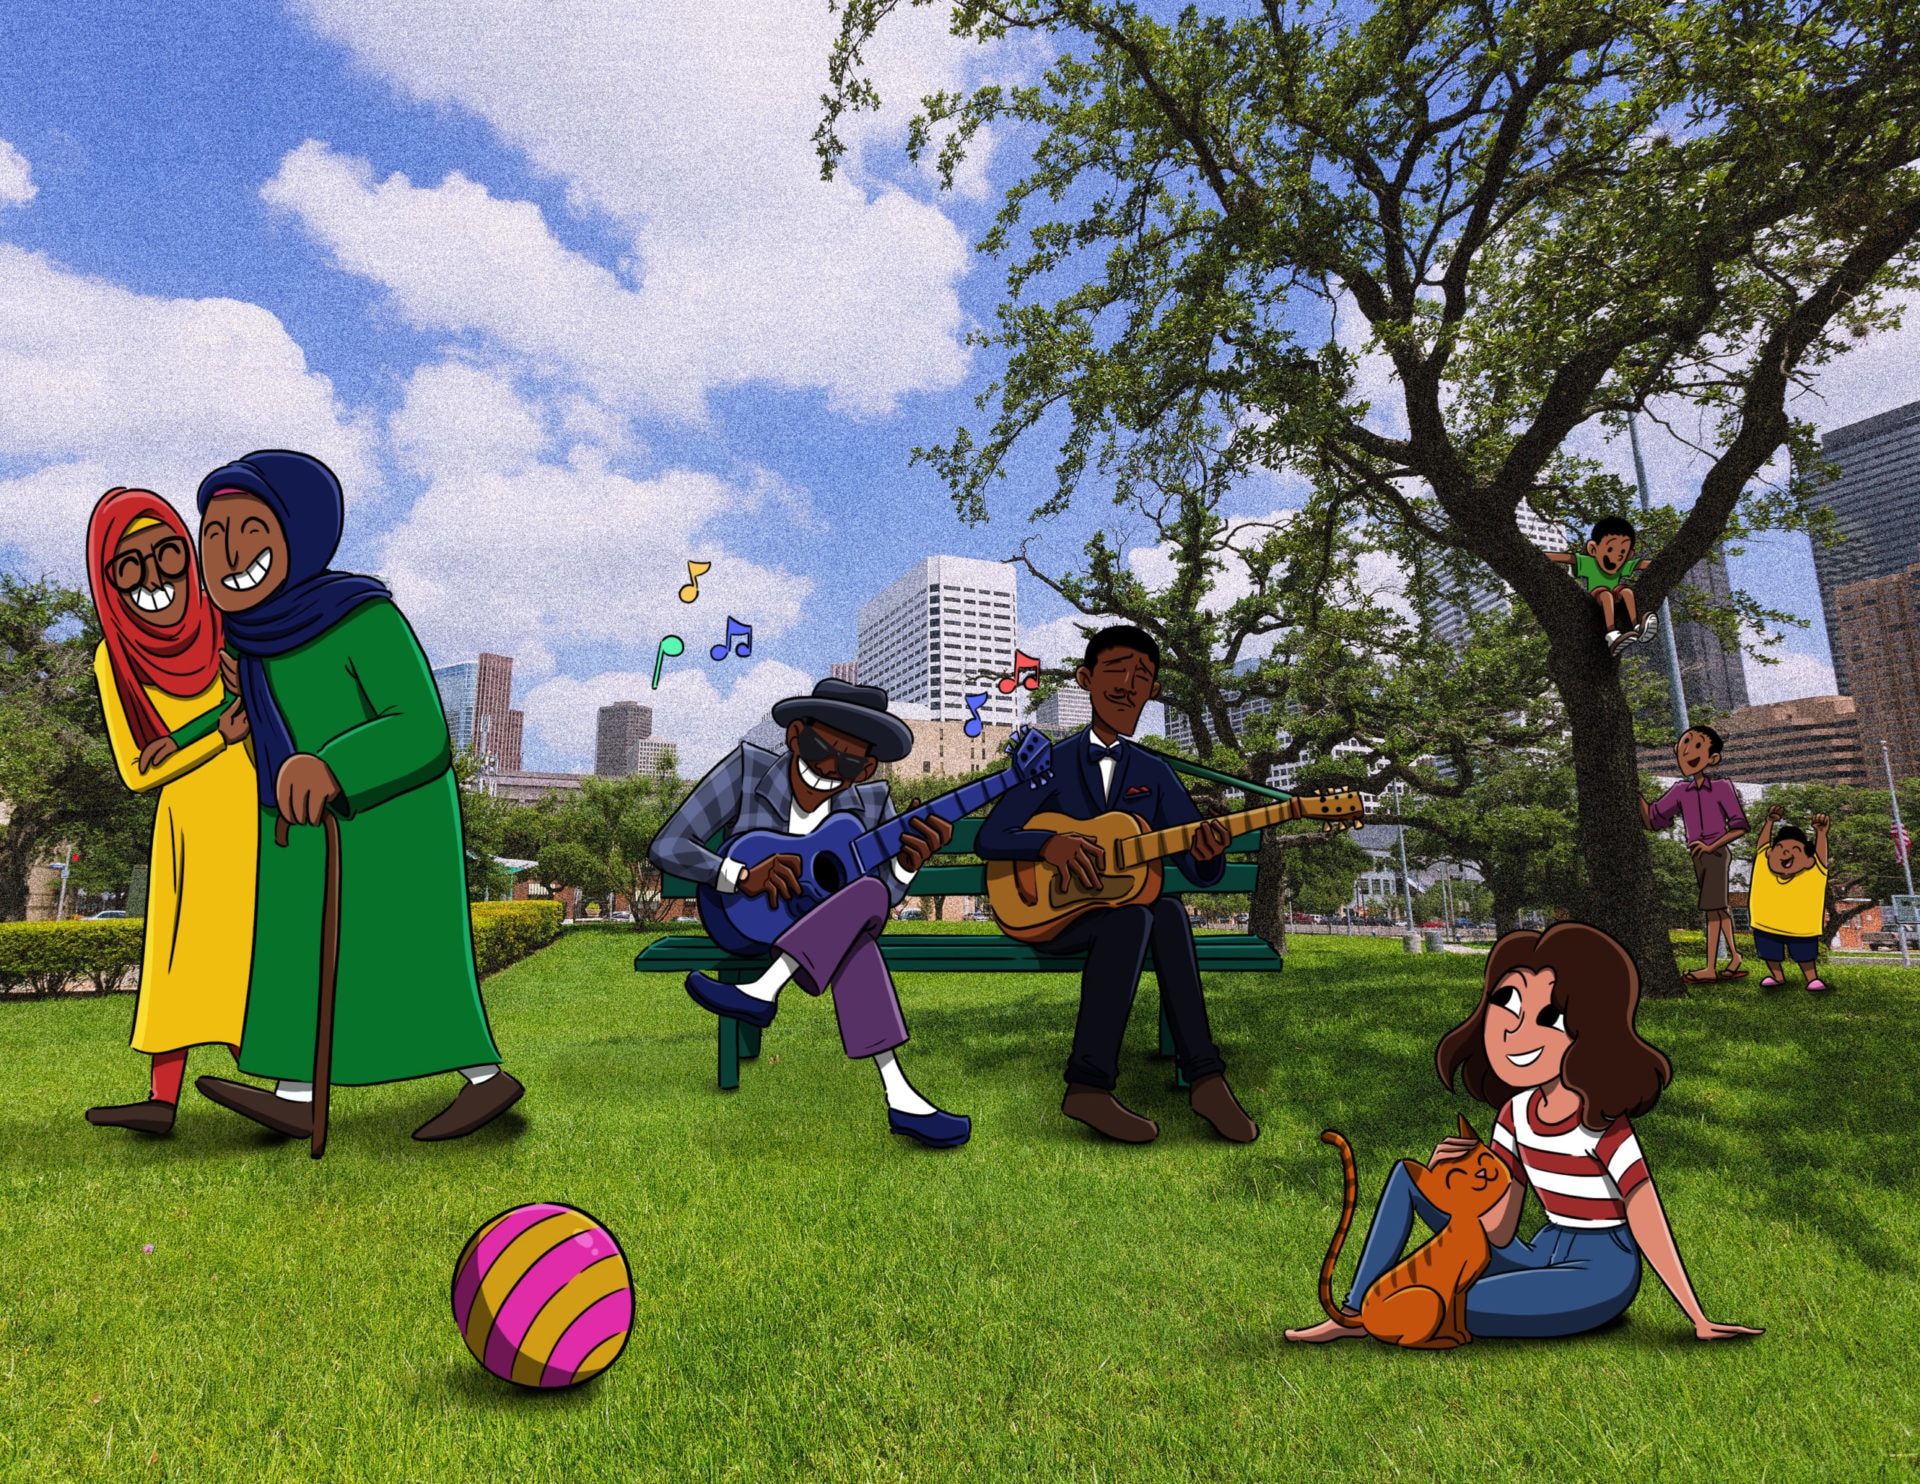 Diverse animated characters enjoying a sunny day in a park with music and relaxation; city skyline in the background.